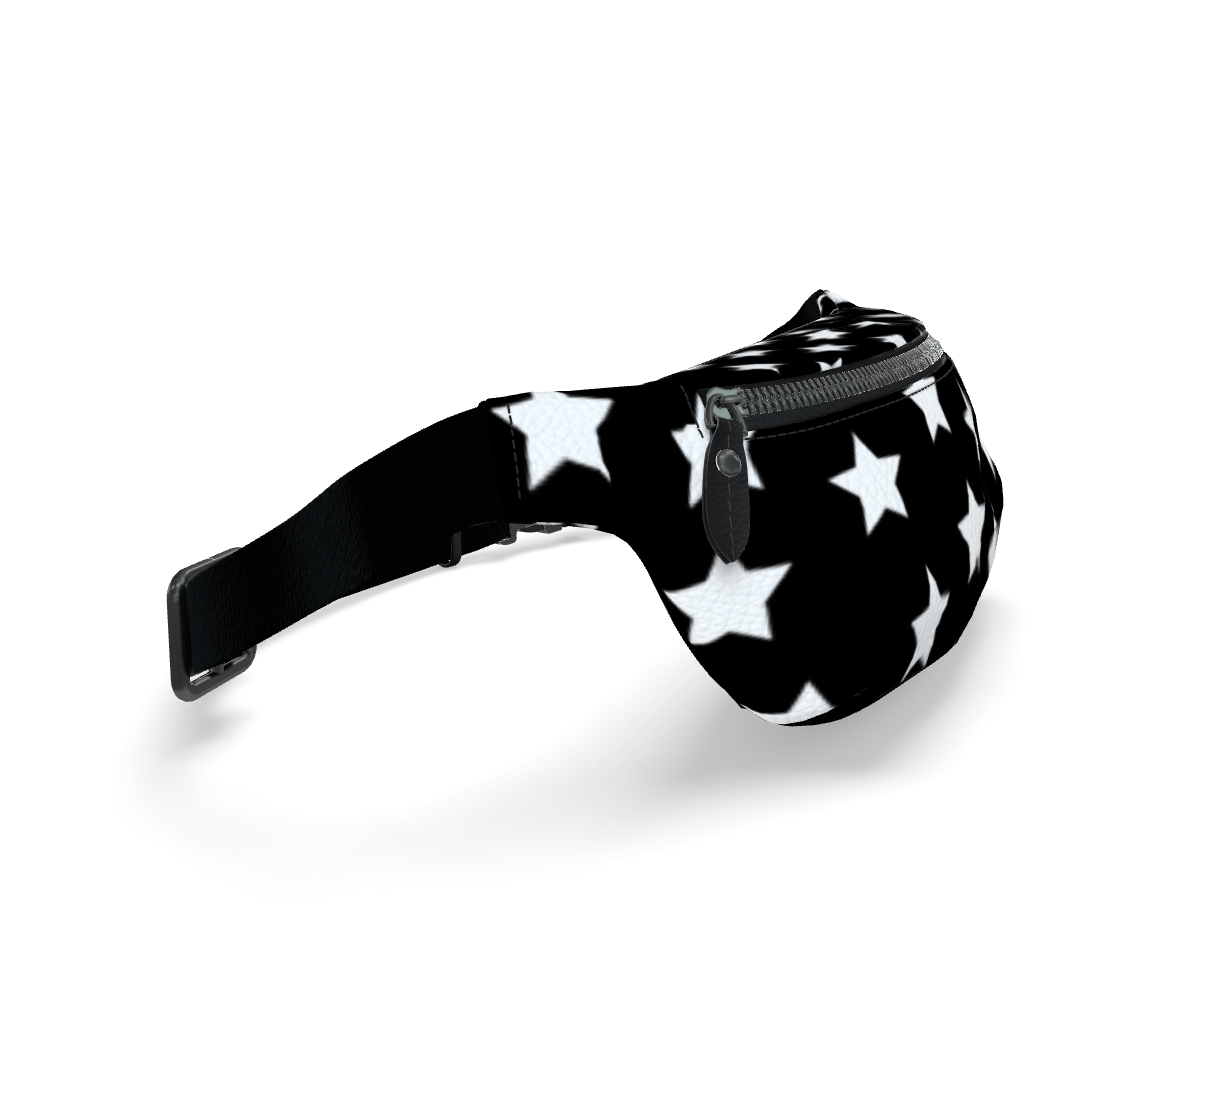 UNTITLED BOUTIQUE Black Leather Stars Fanny Pack - Limited Edition